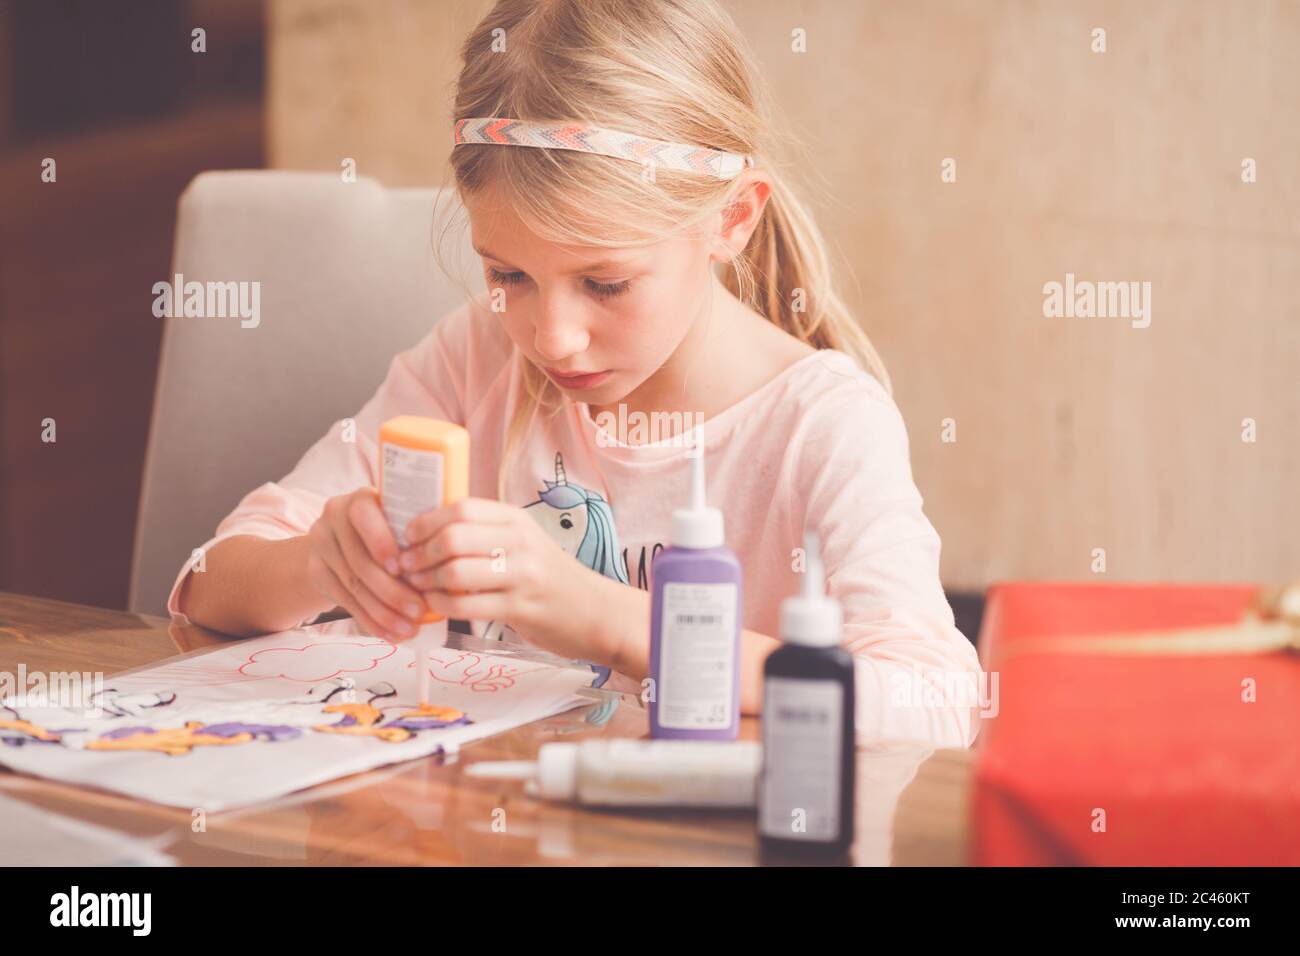 Young girl, primary school age,  doing handicrafts, tinkering with water colours Stock Photo